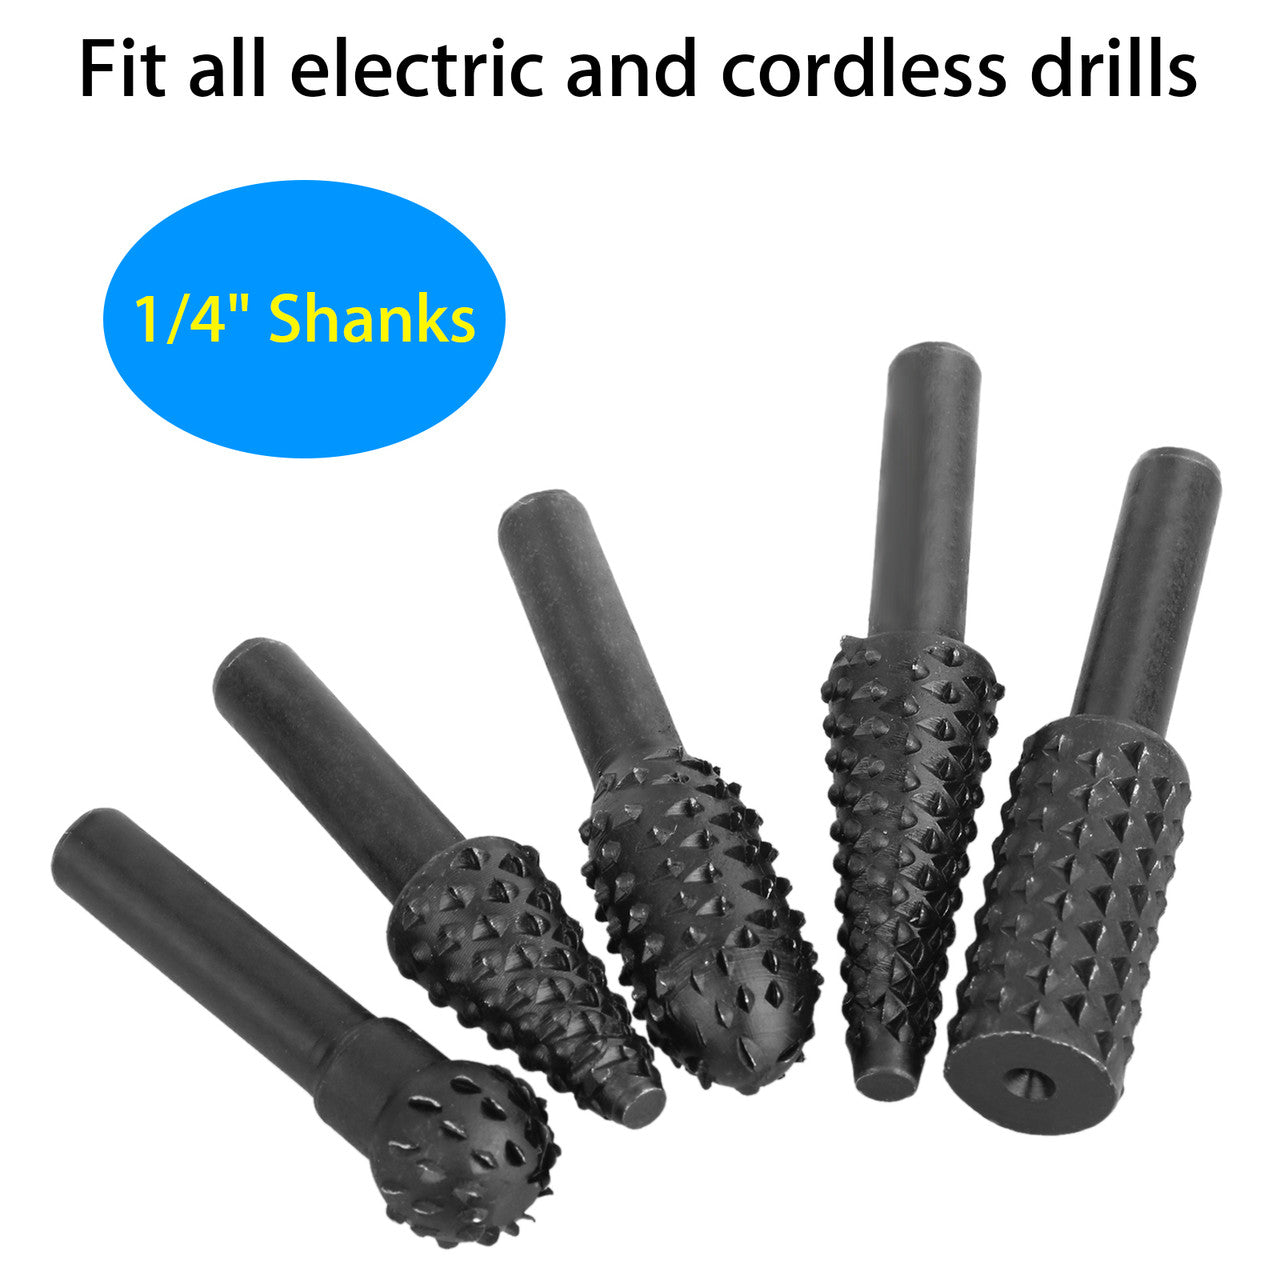 1/4" Drill Bit Set Cutting Tools for Woodworking Knife Wood Carving Tool Fit for All Electric and Cordless Drills, 5-pack